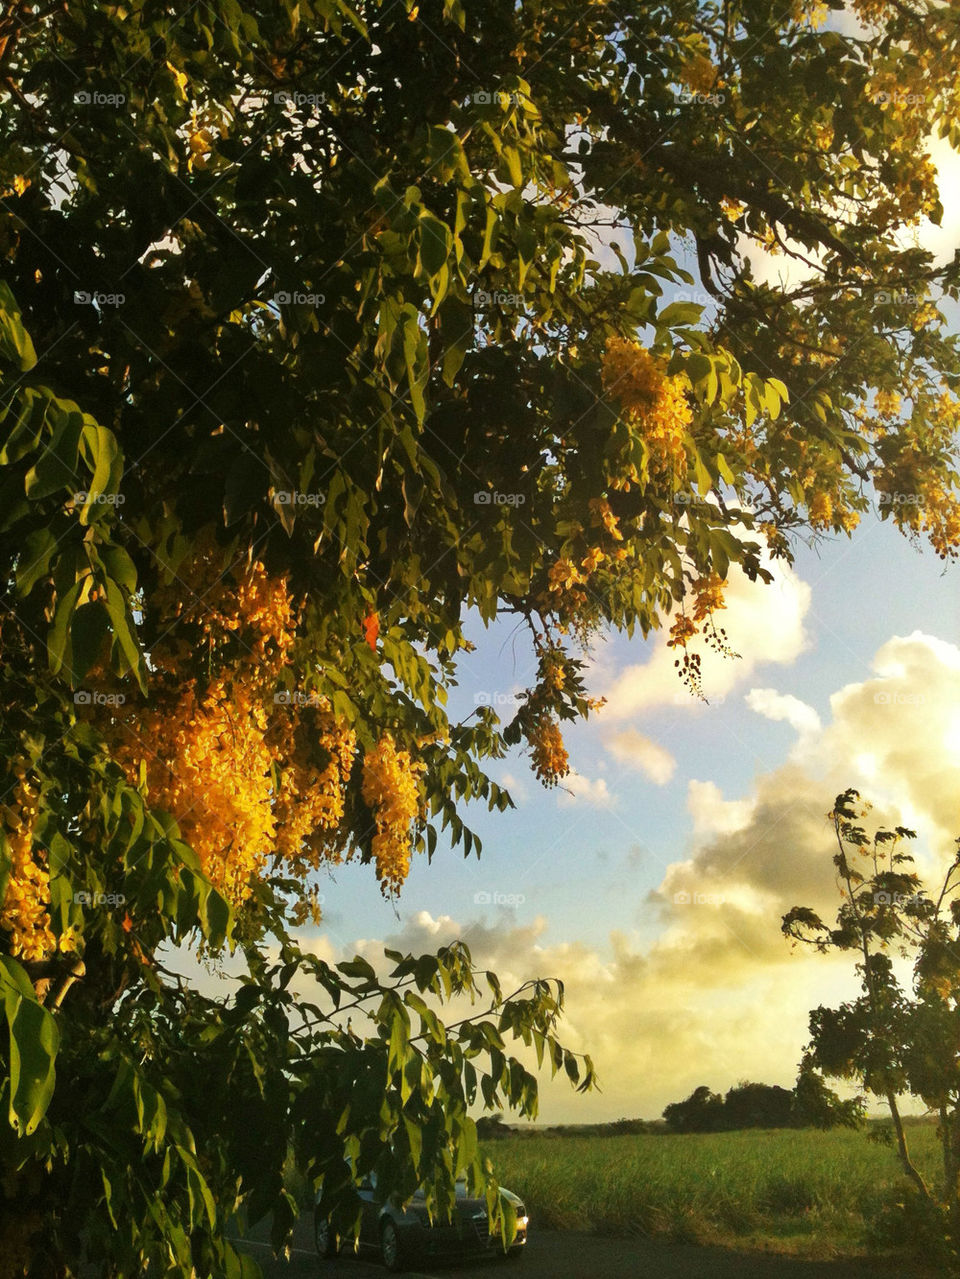 Yellow blossomed tree at sunset in Mauritius.